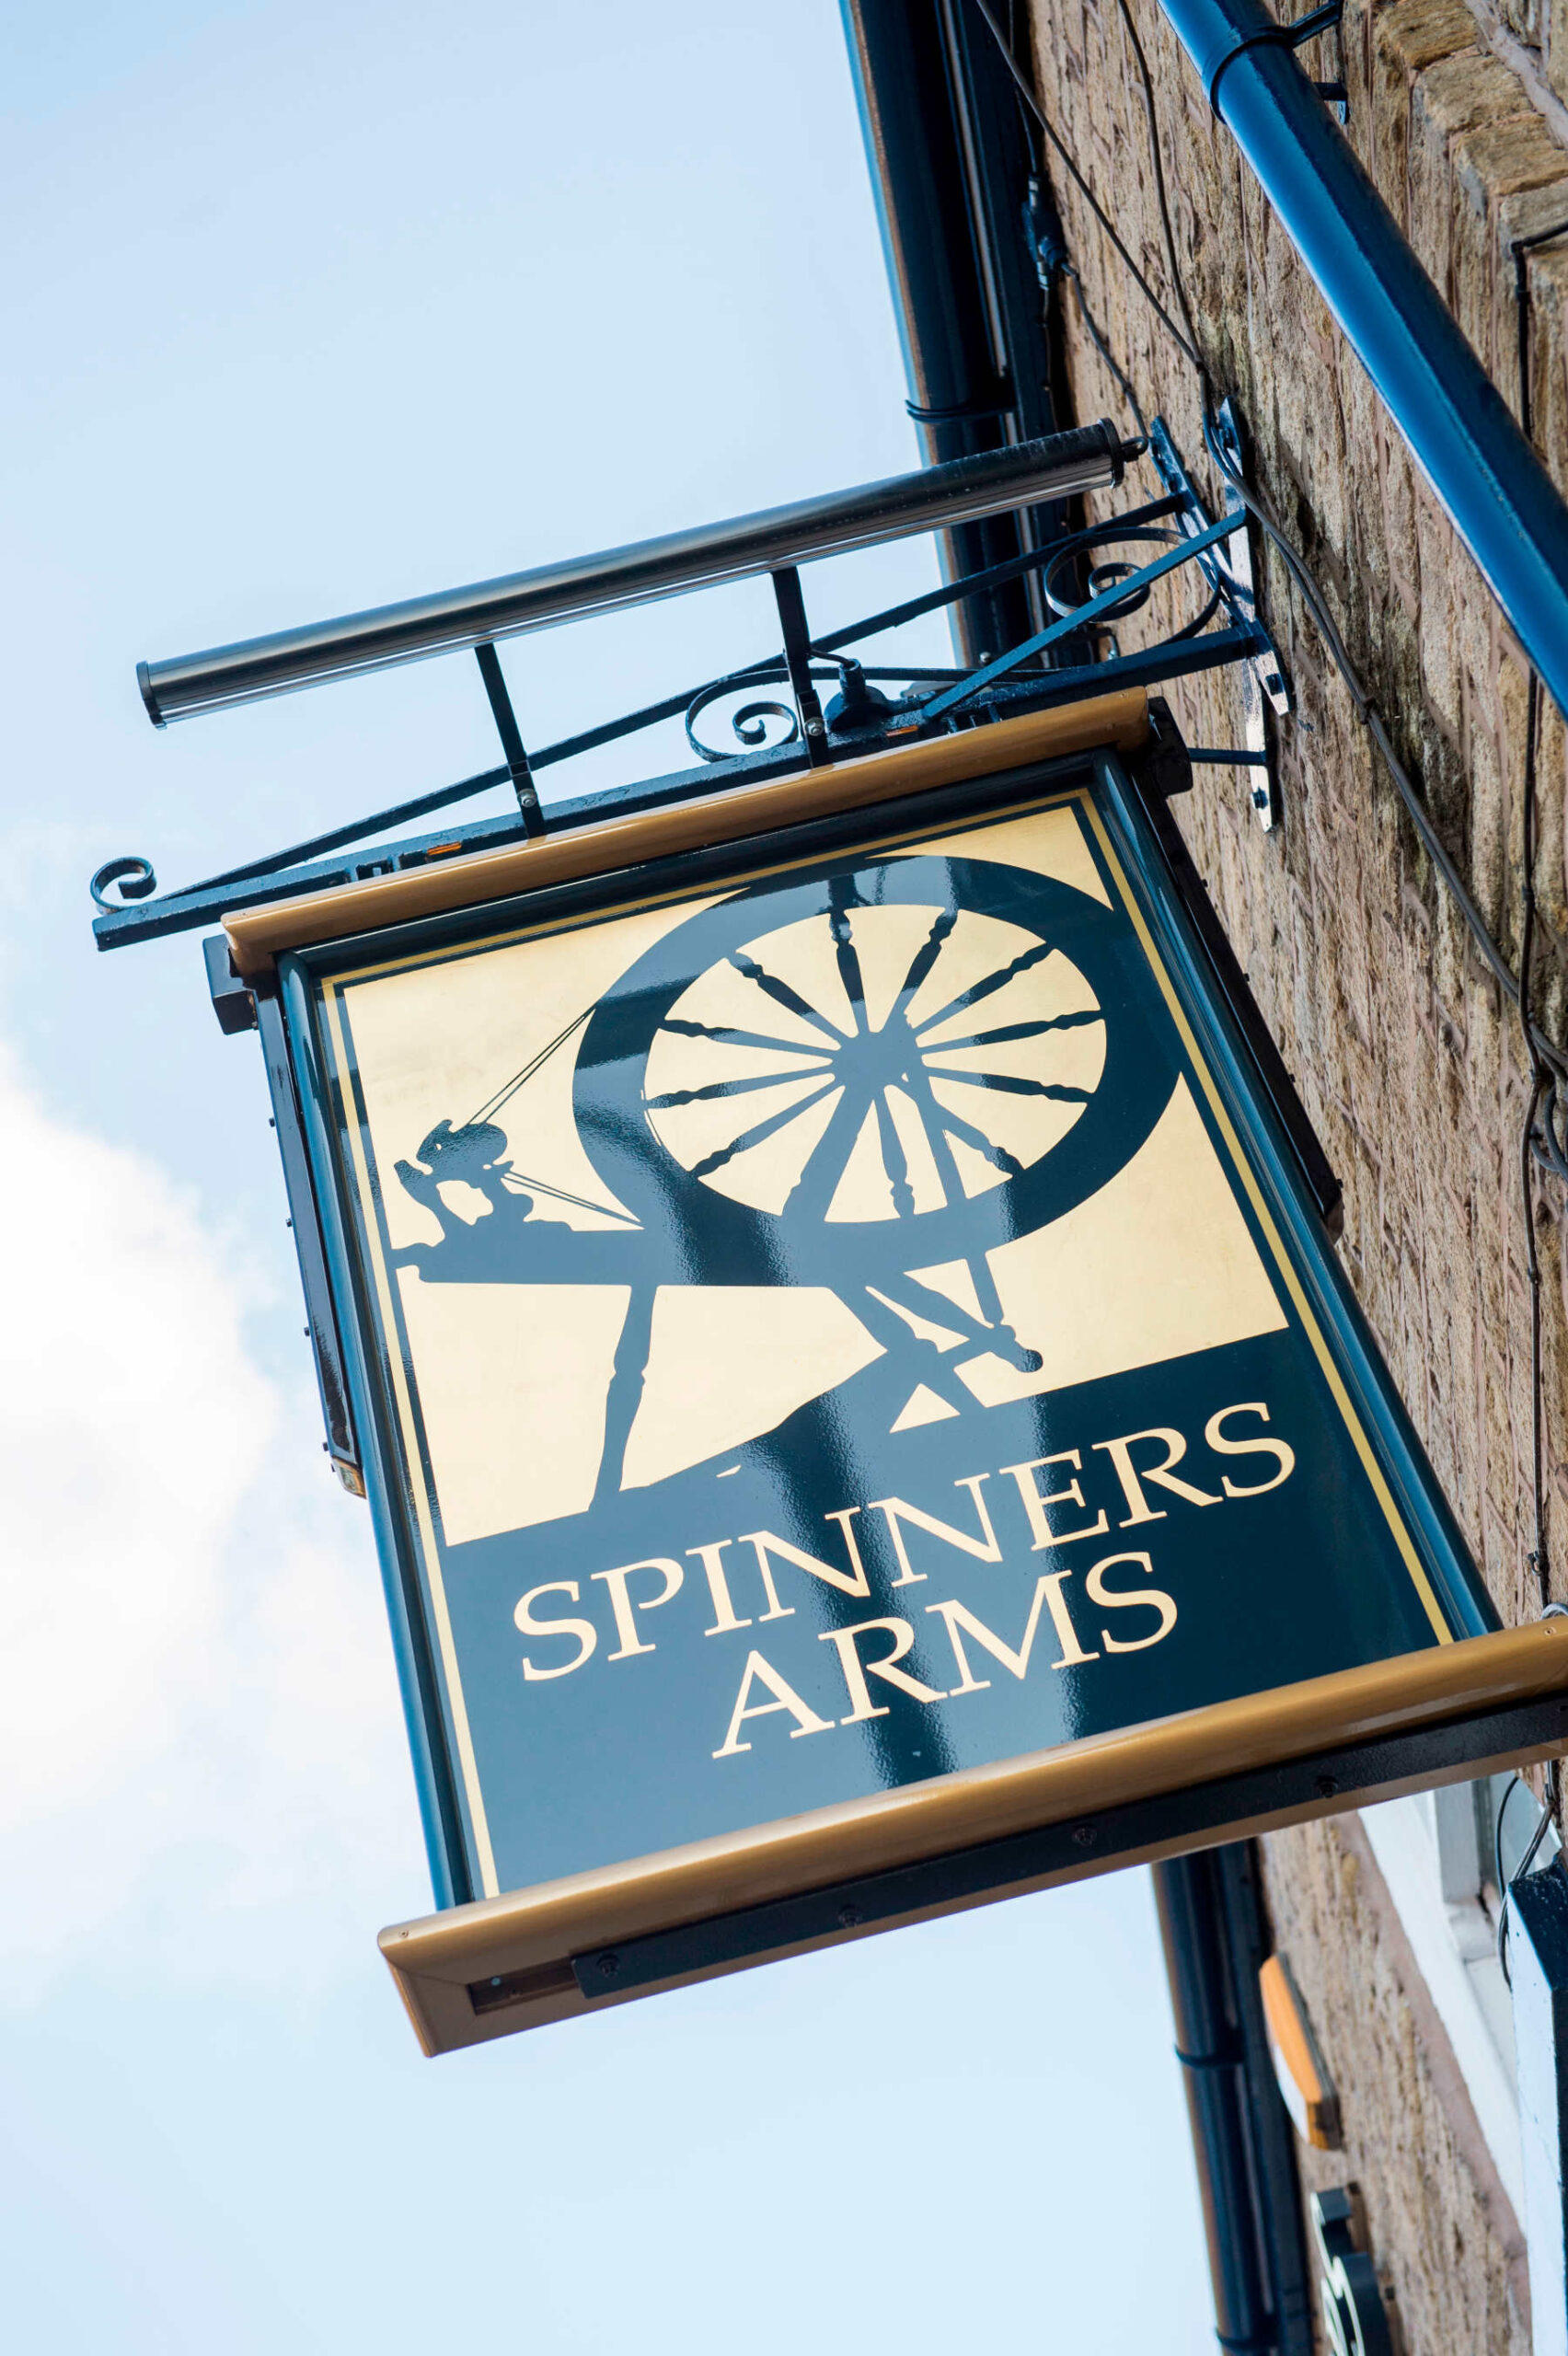 Spinners Arms - Macclesfield, Cheshire SK10 5PW - 01625 576677 | ShowMeLocal.com